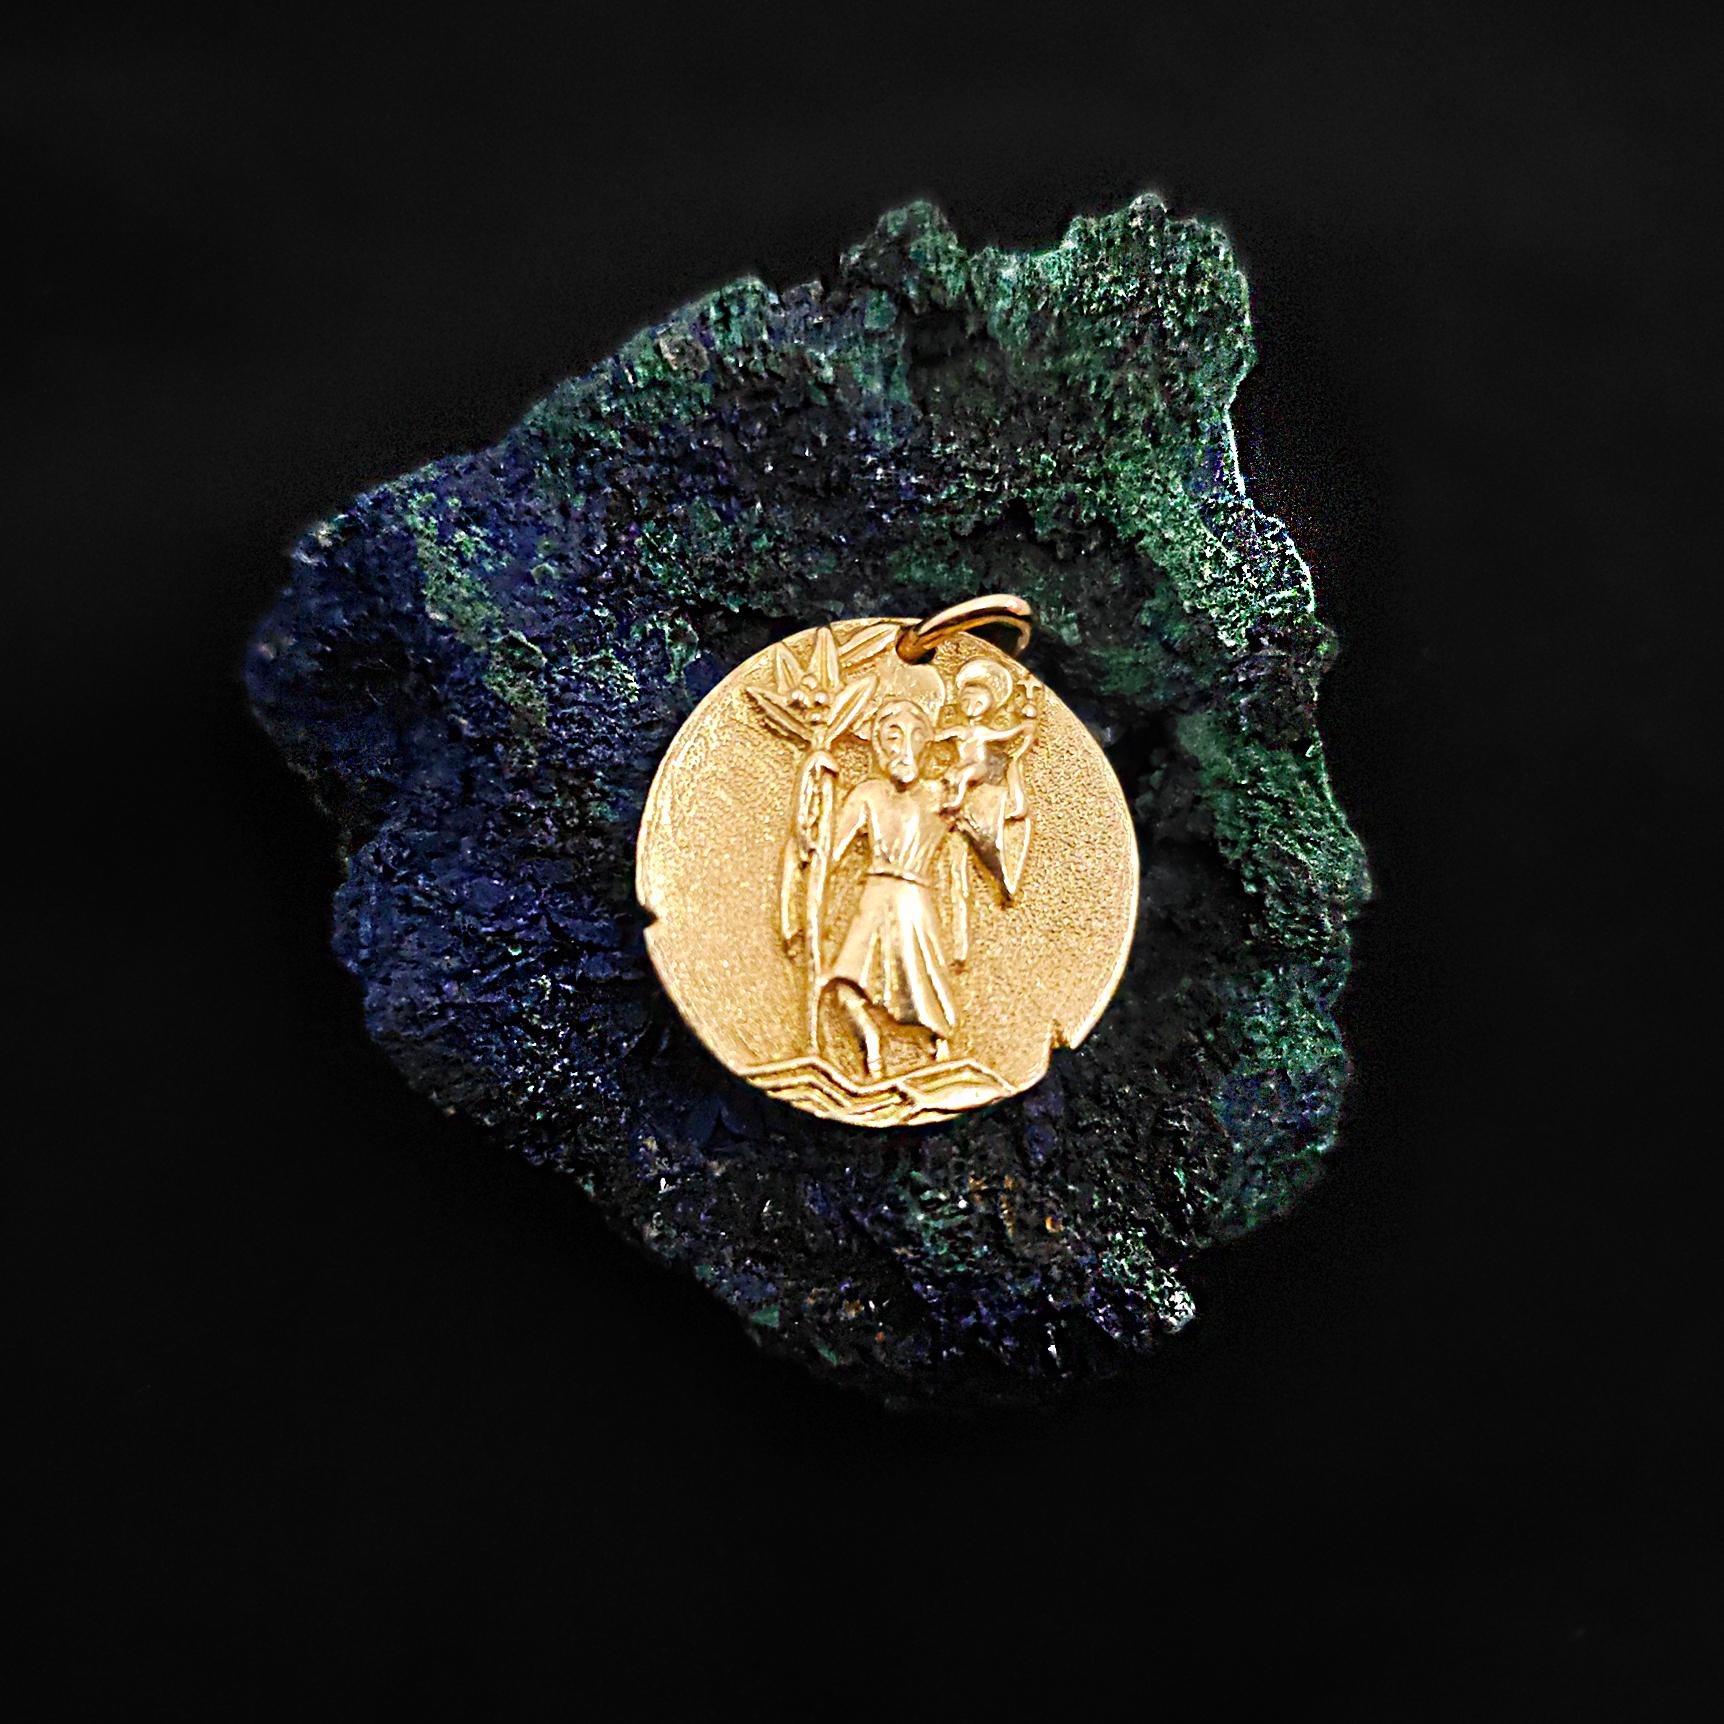 A travelers keepsake. This Saint Christopher medallion  pendant is crafted in textured 18 karat yellow gold, fashioned after an ancient coin. 

One side of the pendant features a repoussé image depicting St. Christopher carrying the Christ child.